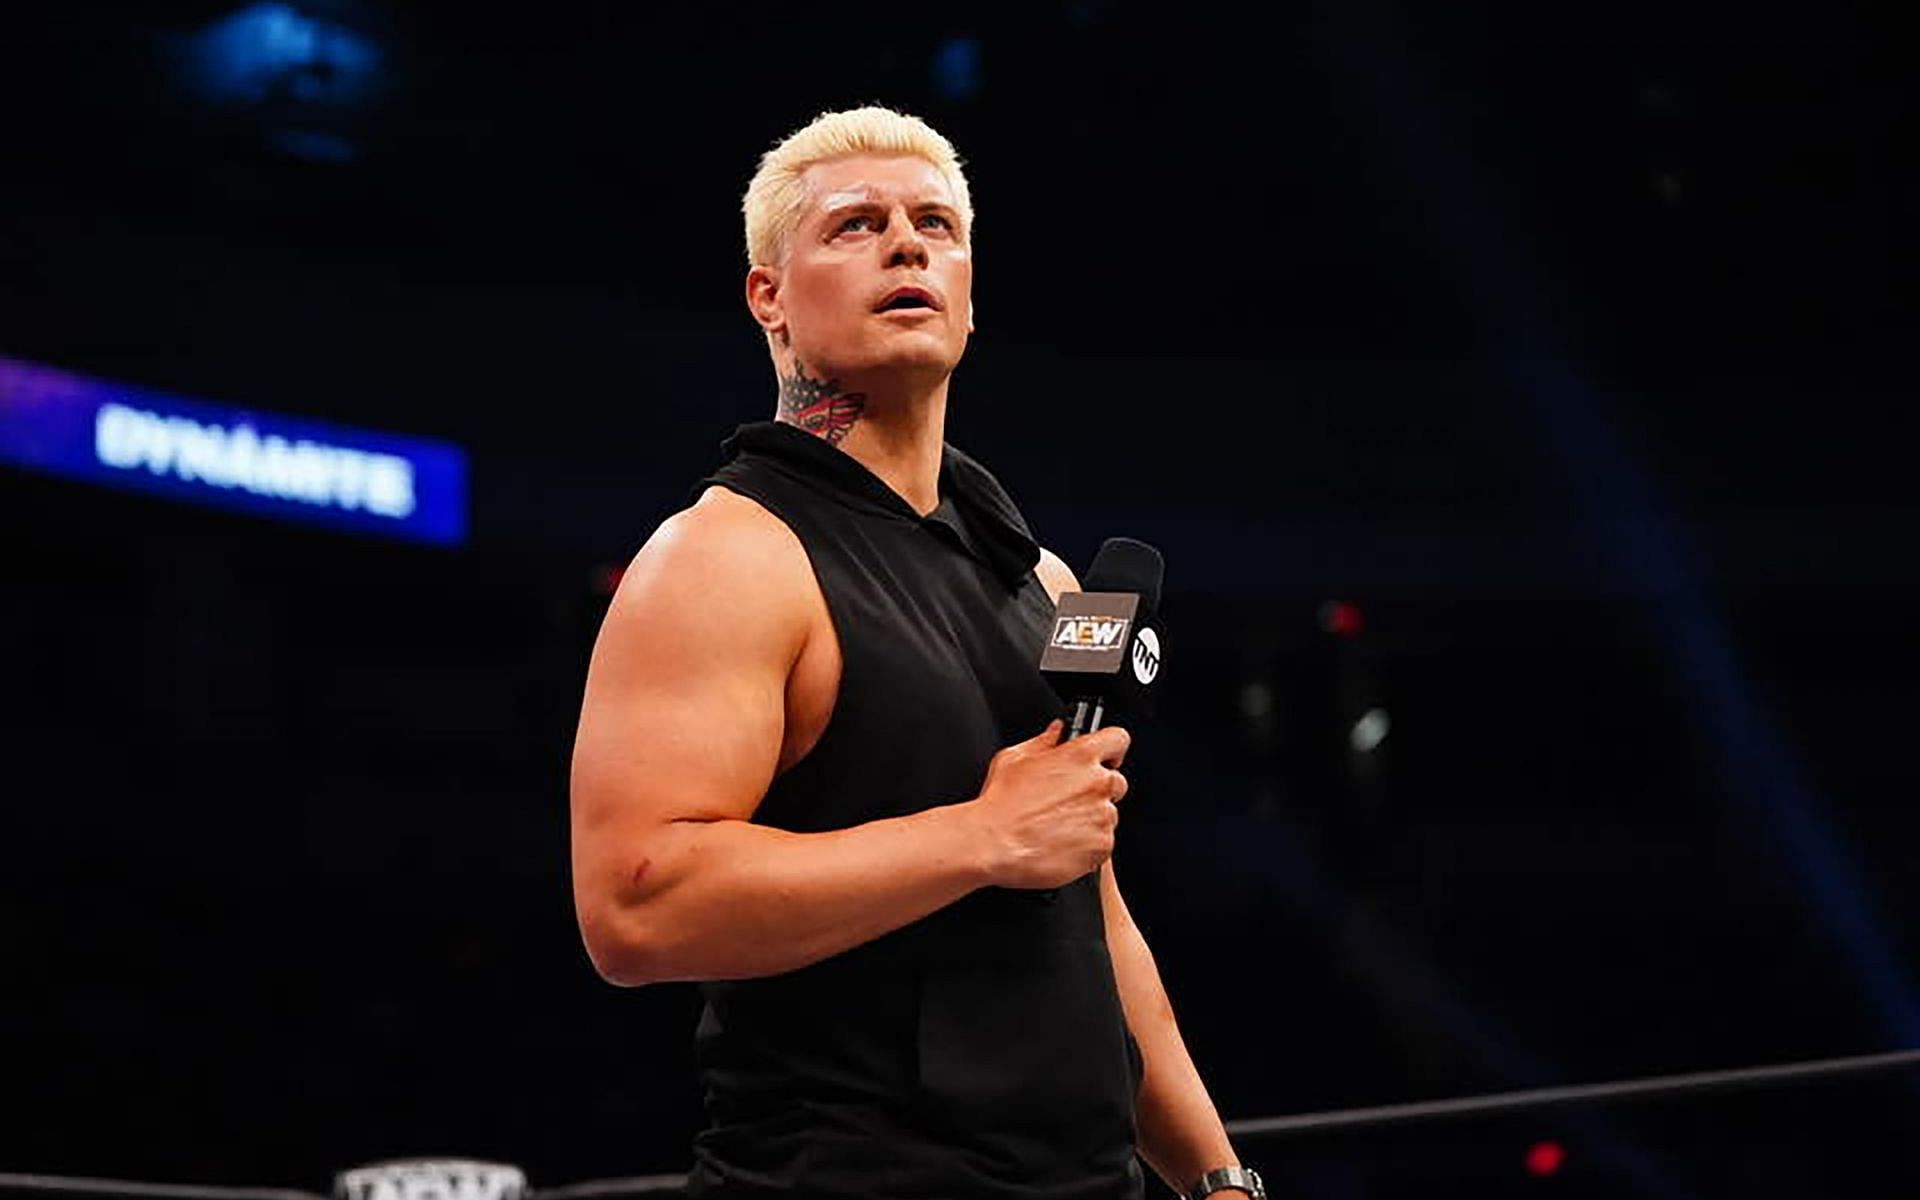 Current WWE Superstar and former AEW TNT Champion Cody Rhodes